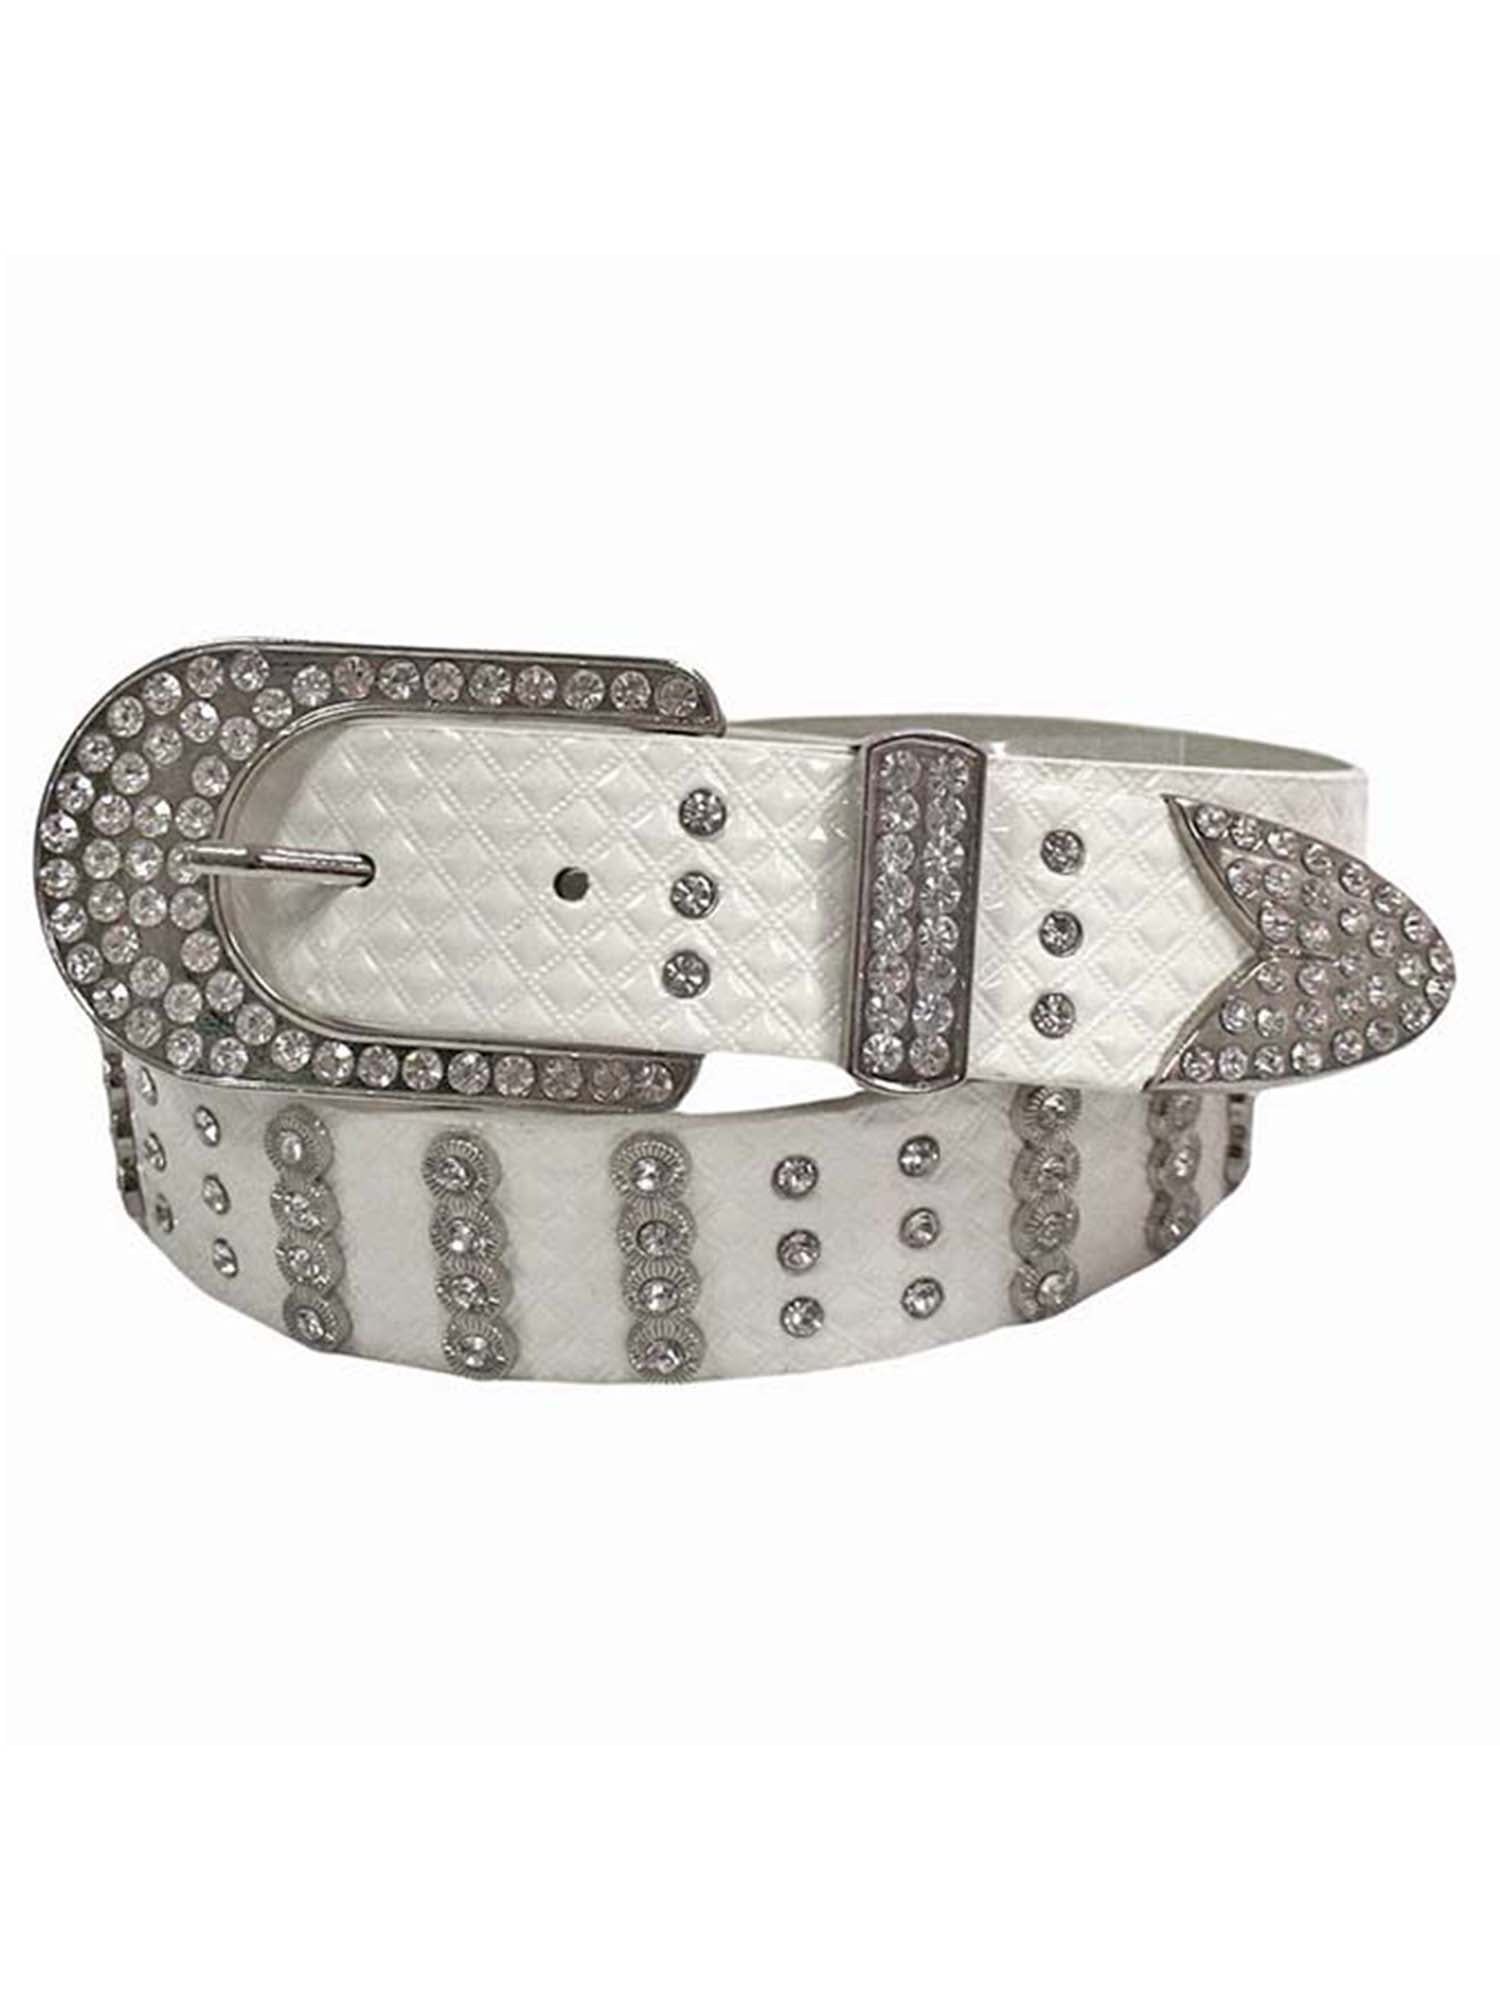 4430 1.5" WIDE WHITE BELT W/3 ROWS OF SILVER PYRAMIDS & CHAIN IN SIZES UP TO 3XL 